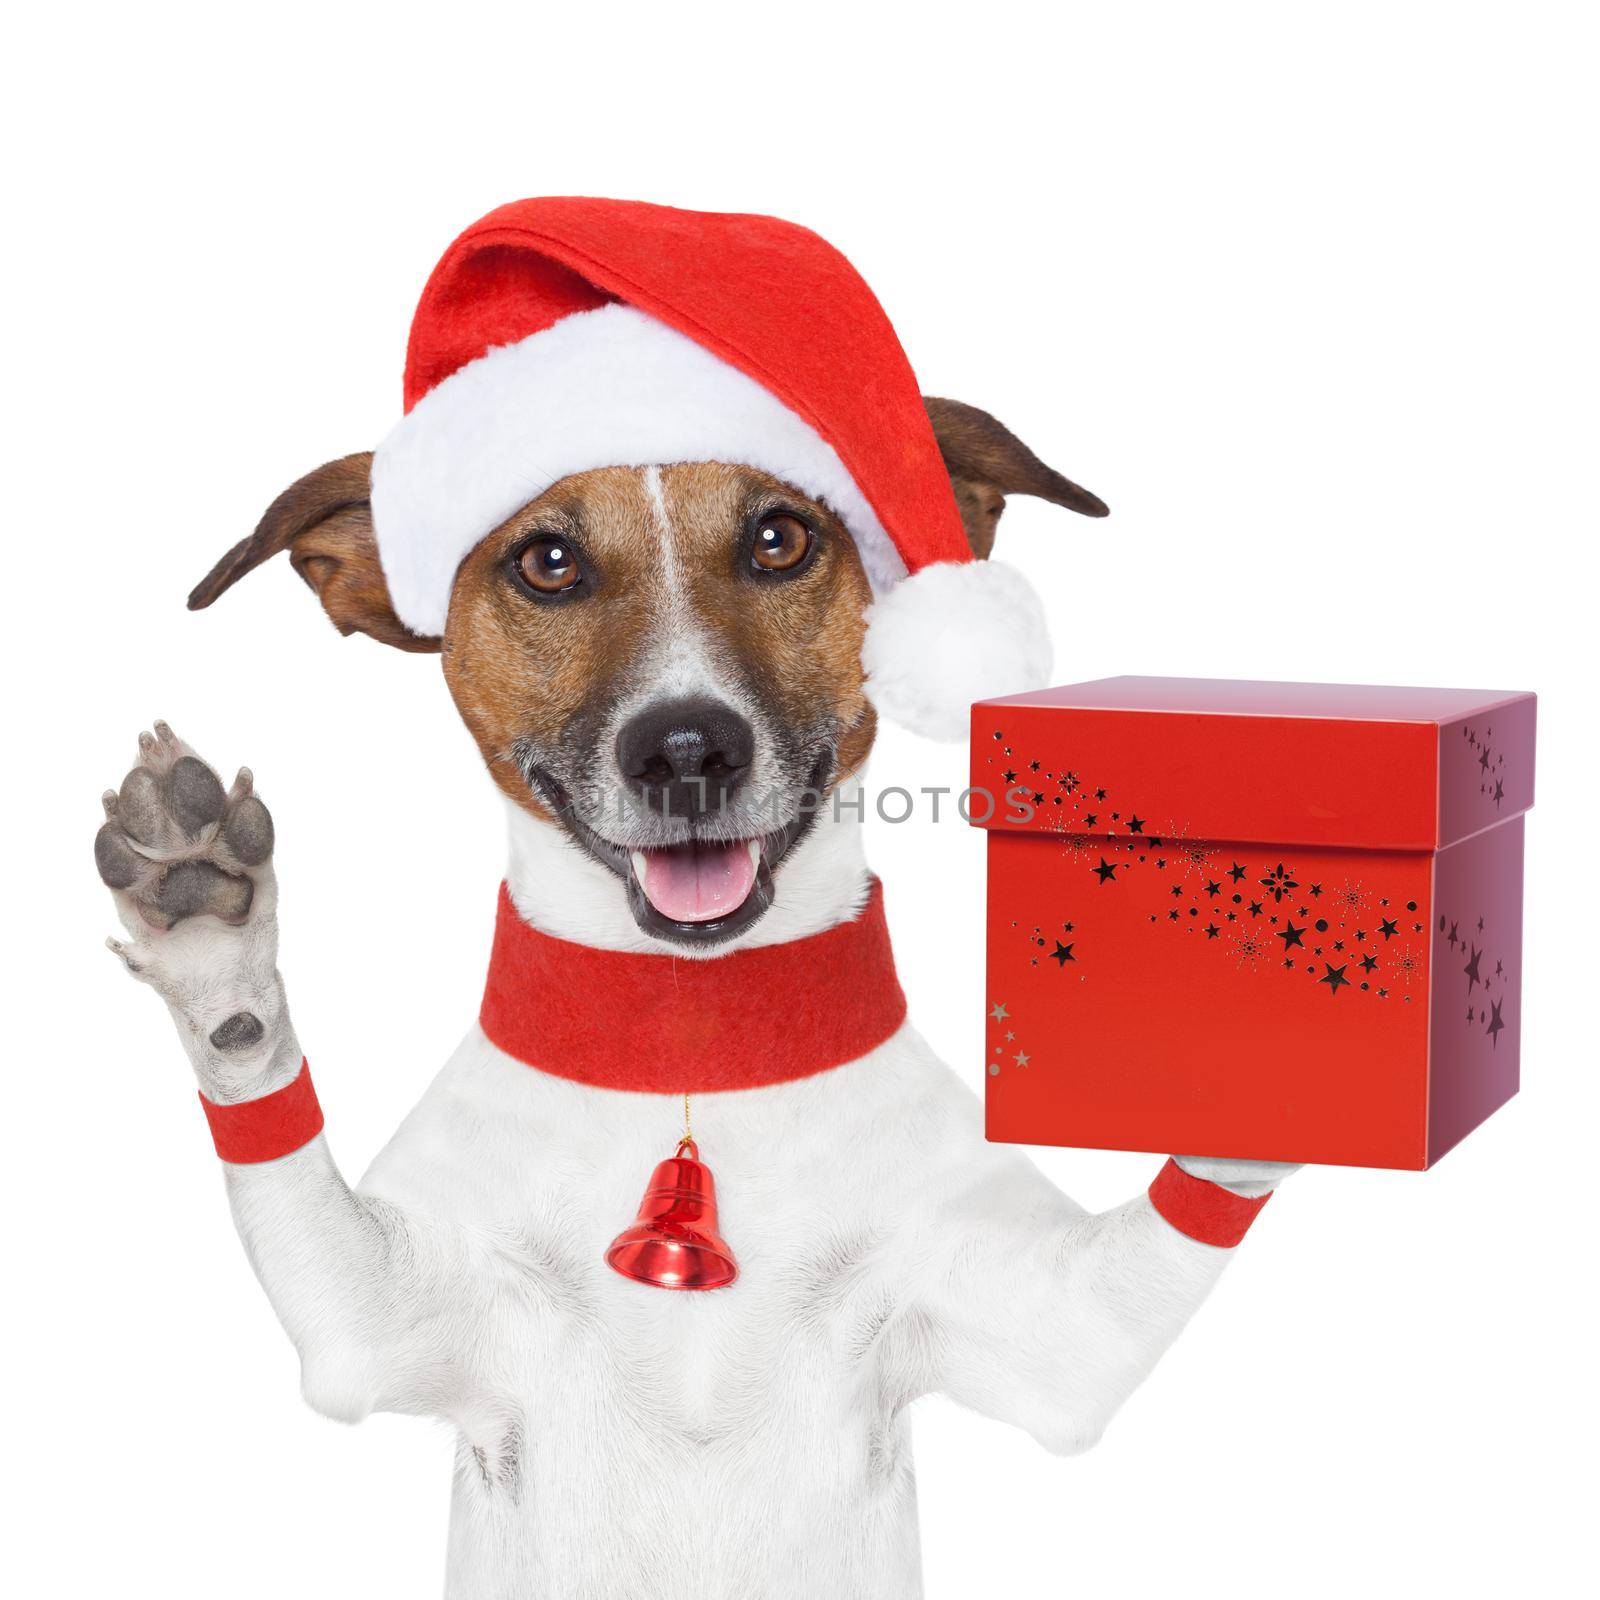 surprise christmas dog with a present box by Brosch